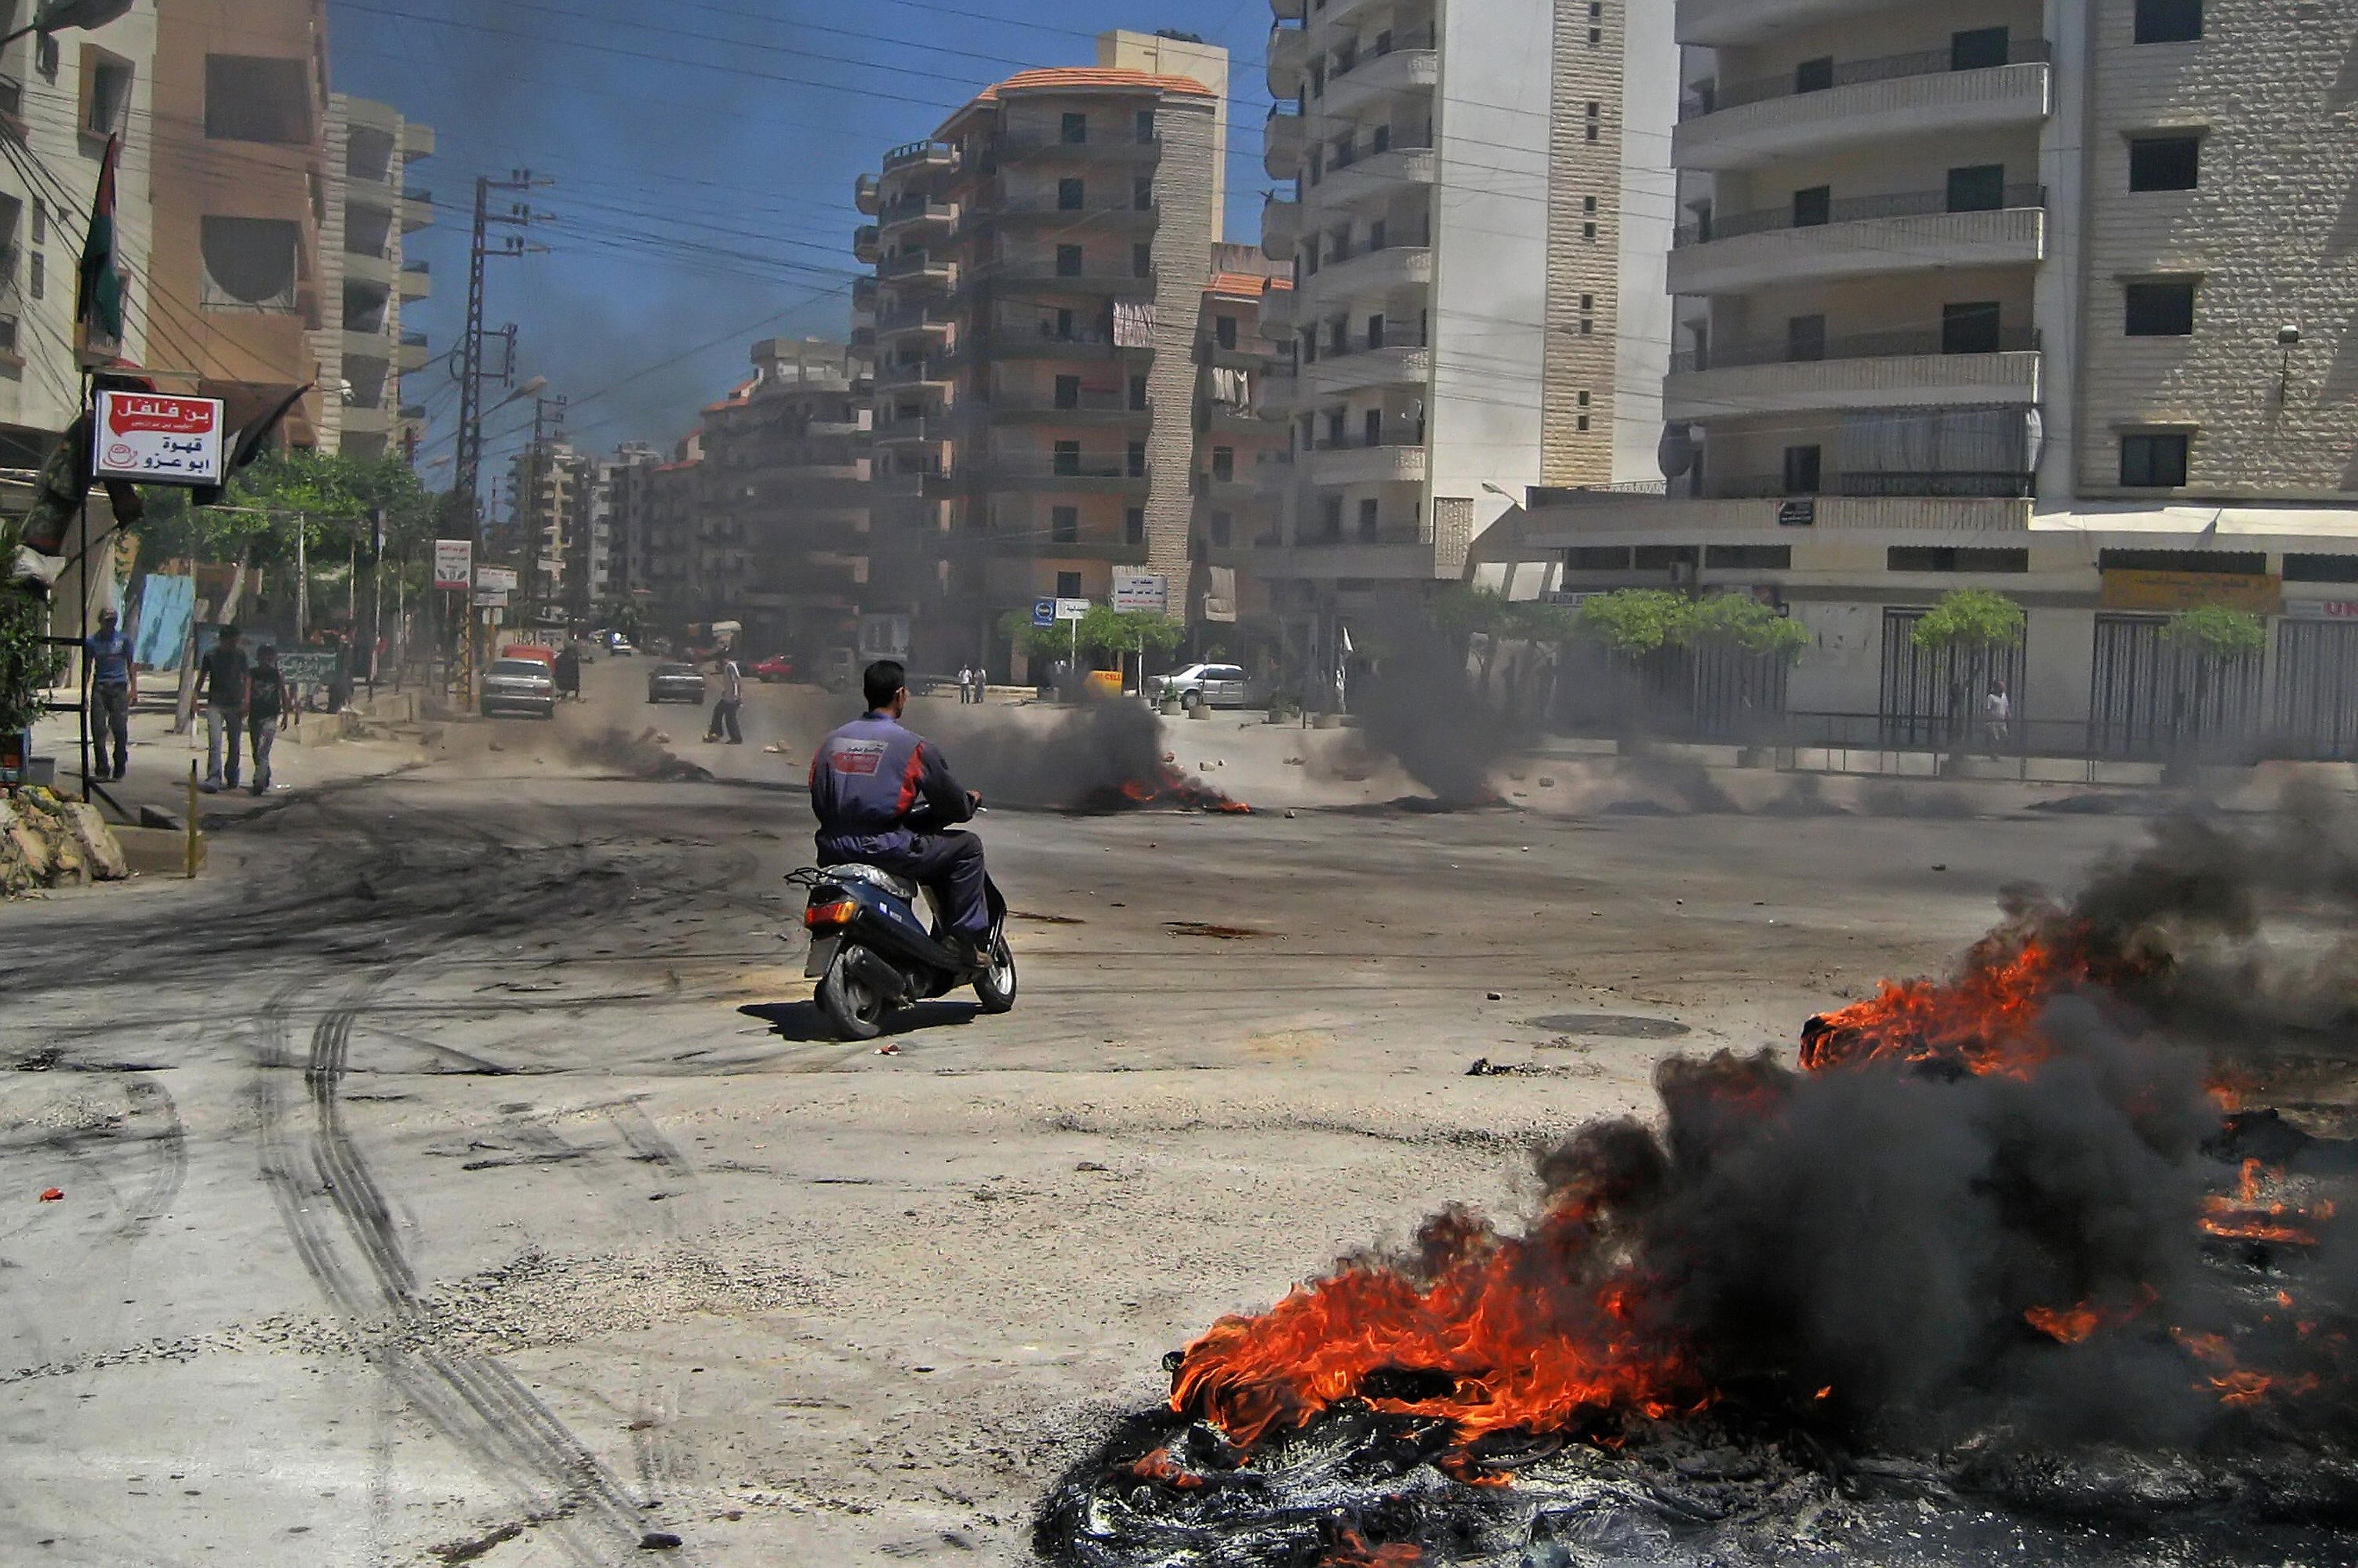 Under fire: in May 2007, a motorcyclist rides past burning tires at the entrance of the Palestinian refugee camp of Bedawi, adjacent to Nahr al-Bared